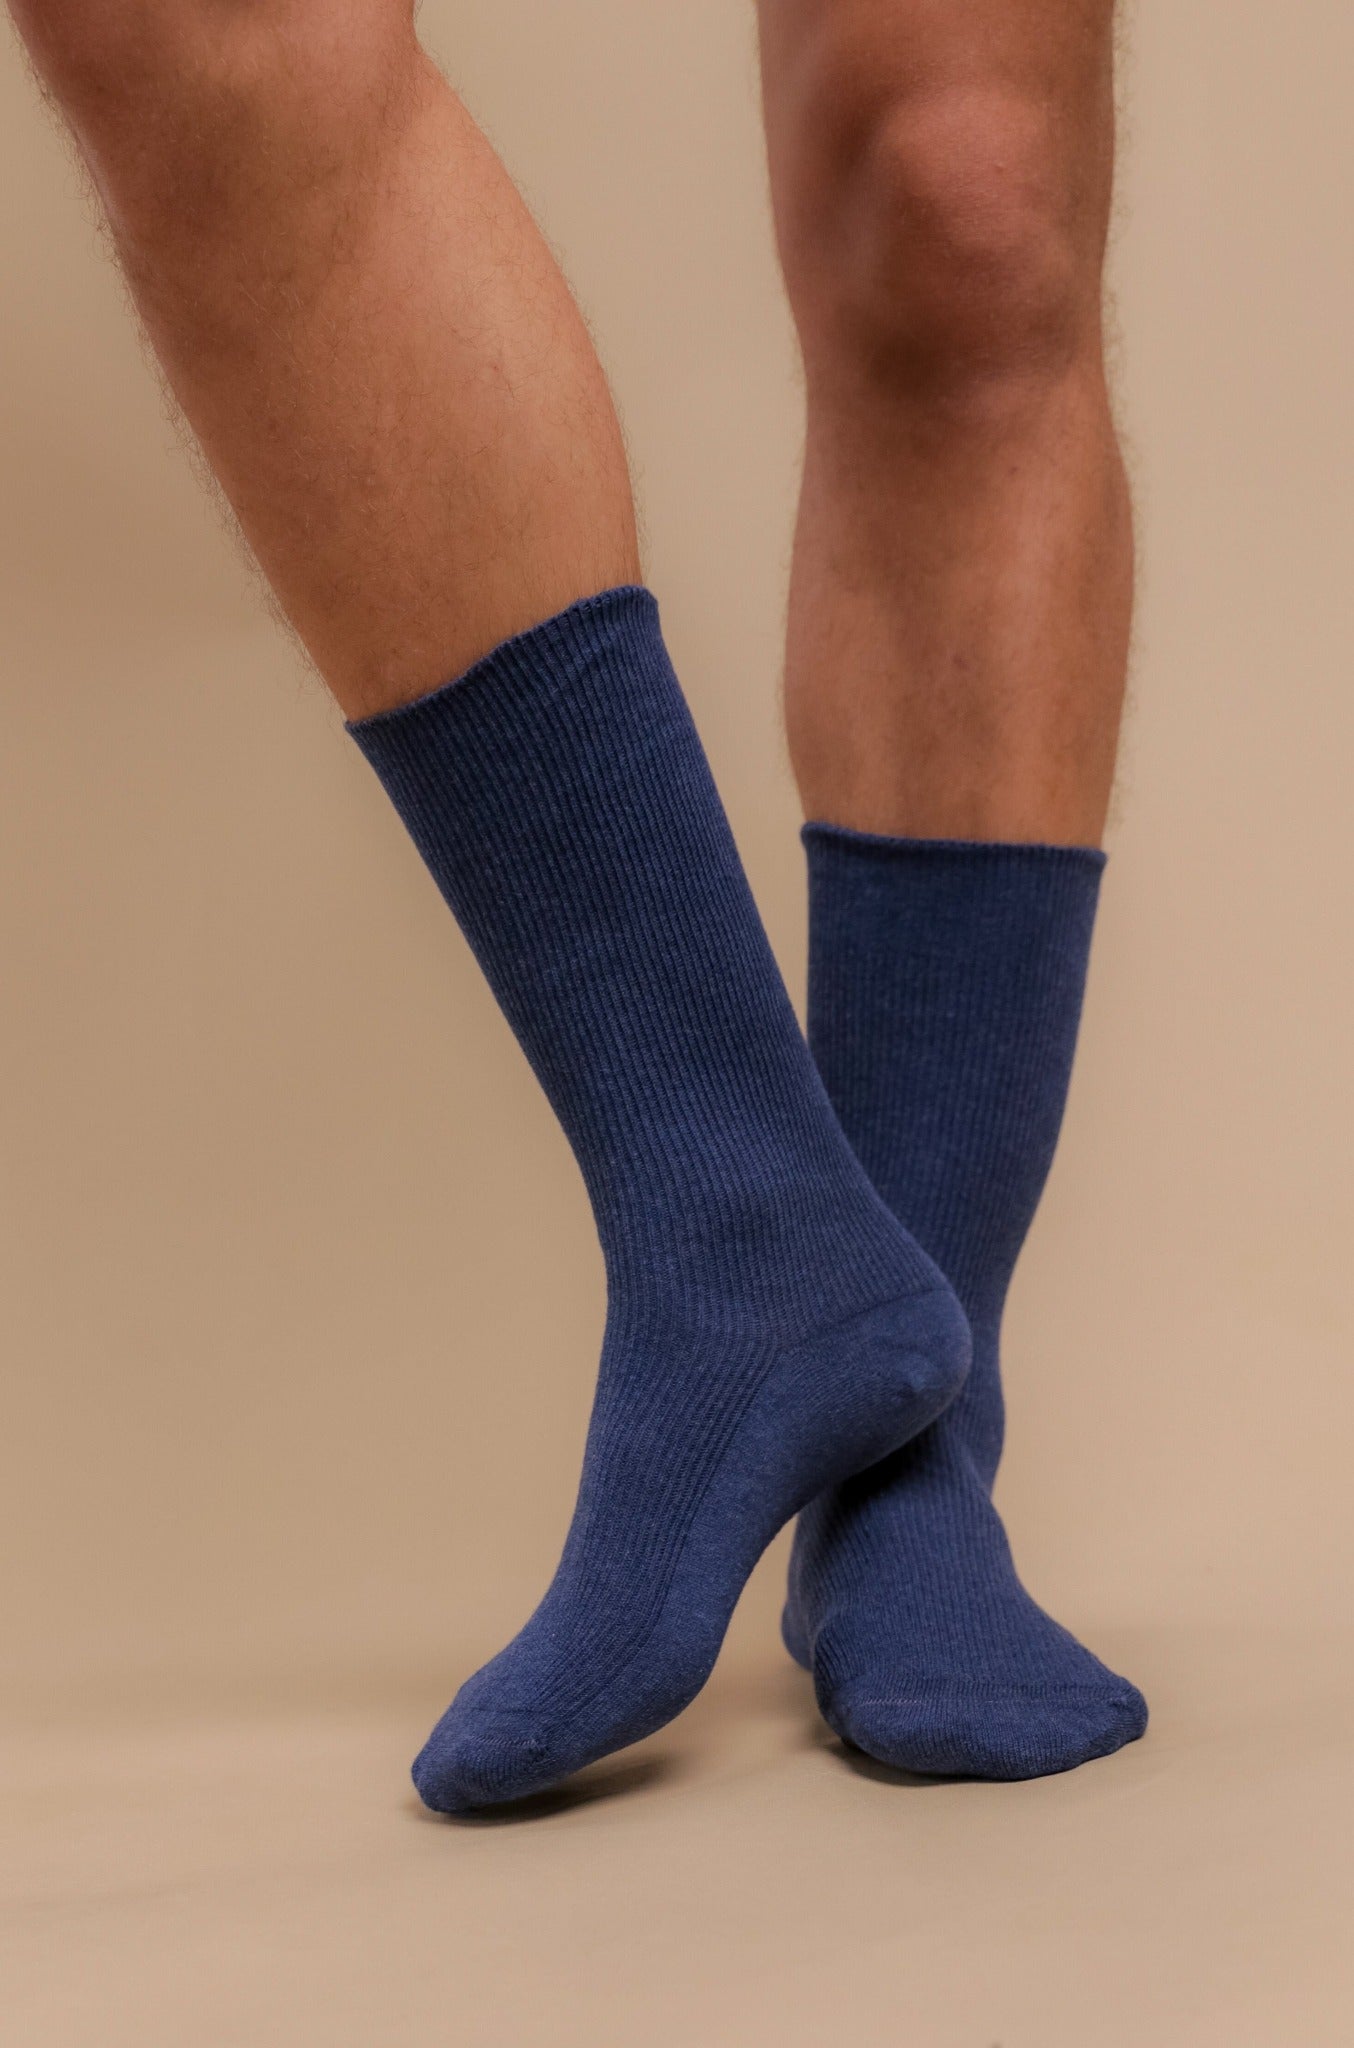 Latex Free Organic Cotton Socks - 2 Pack by Cottonique